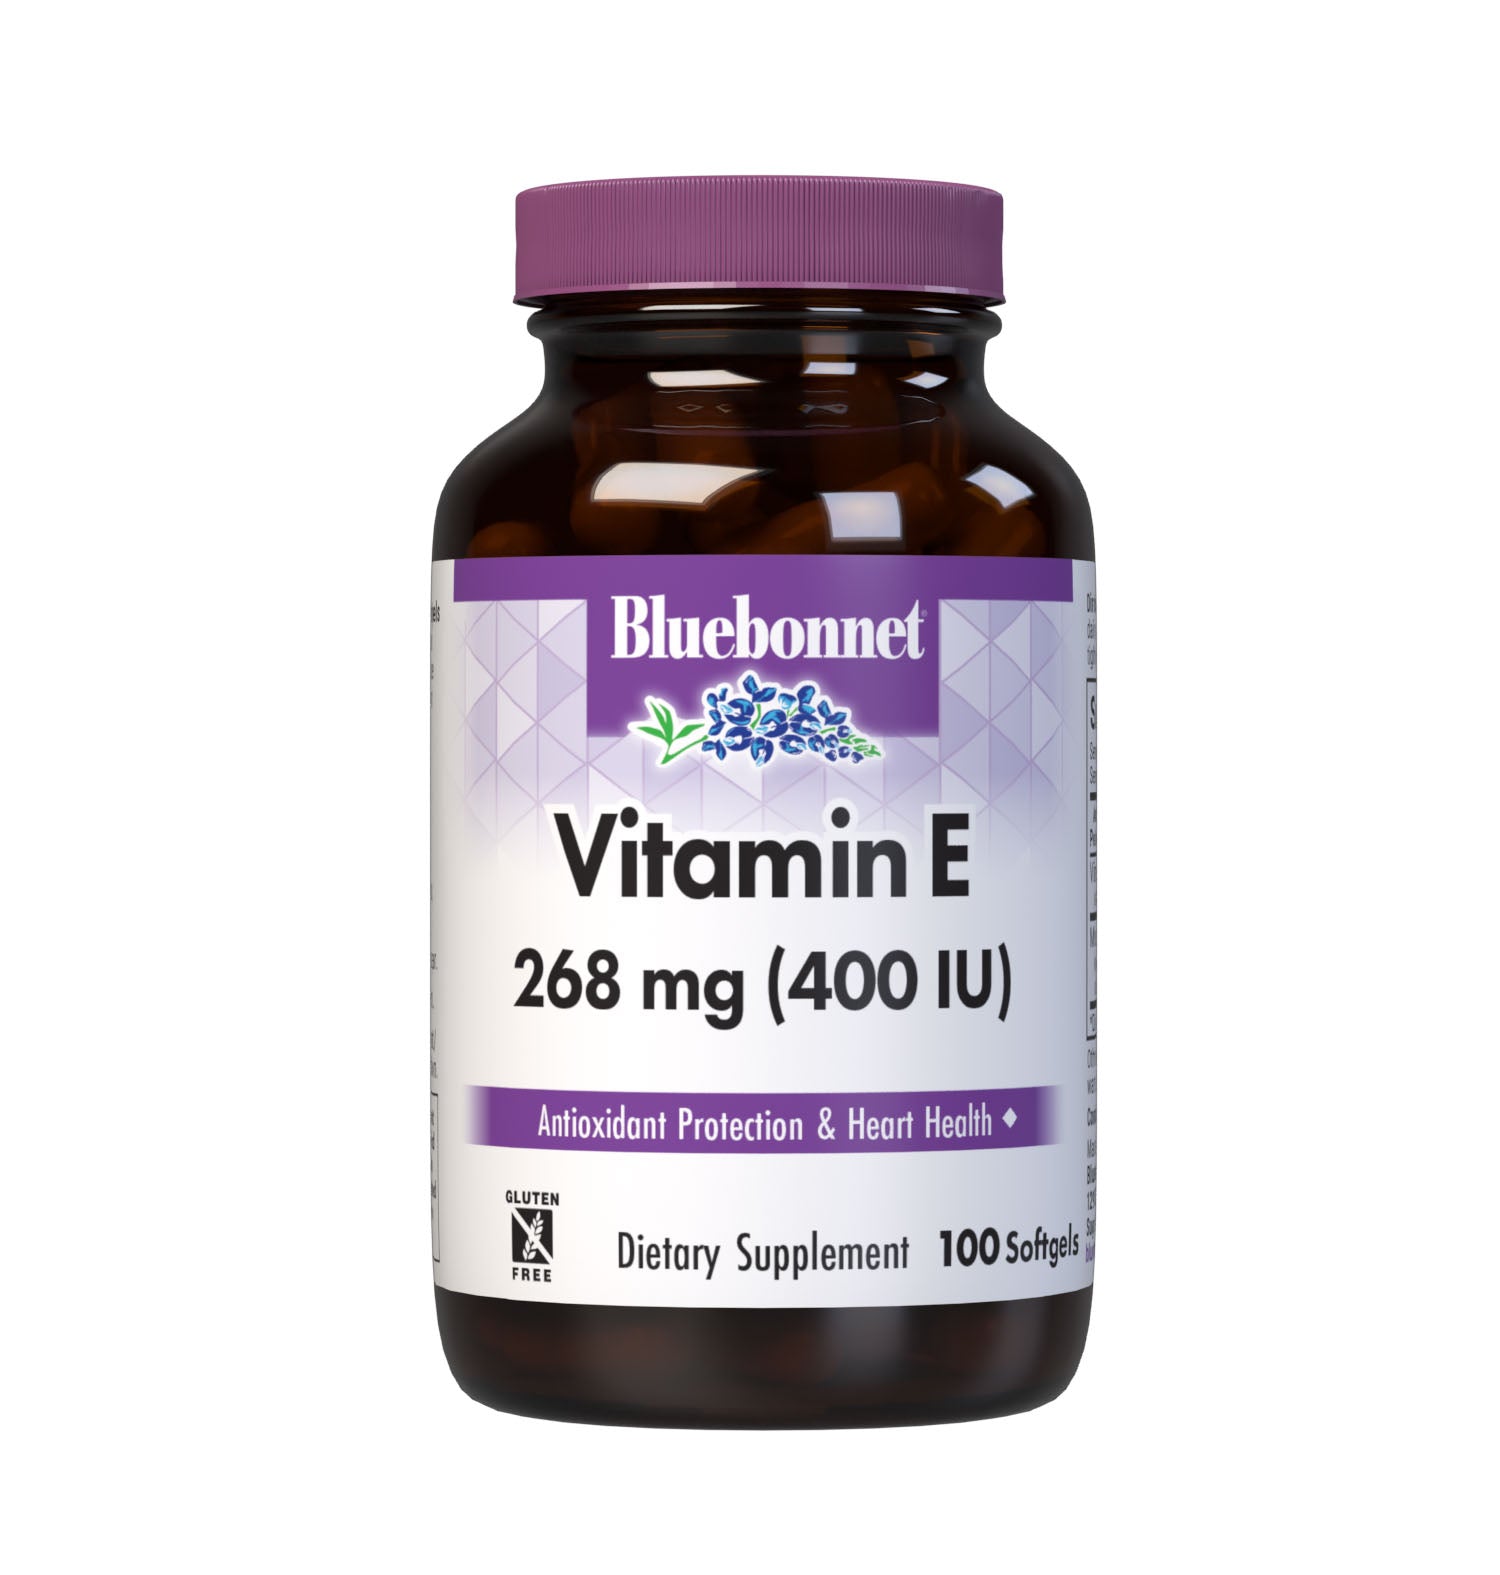 Bluebonnet’s Vitamin E 268 mg (400 IU) Mixed Softgels are specially formulated with d-alpha tocopherol and tocopherol isomers (beta, delta and gamma) in a base of vegetable oil. #size_100 count